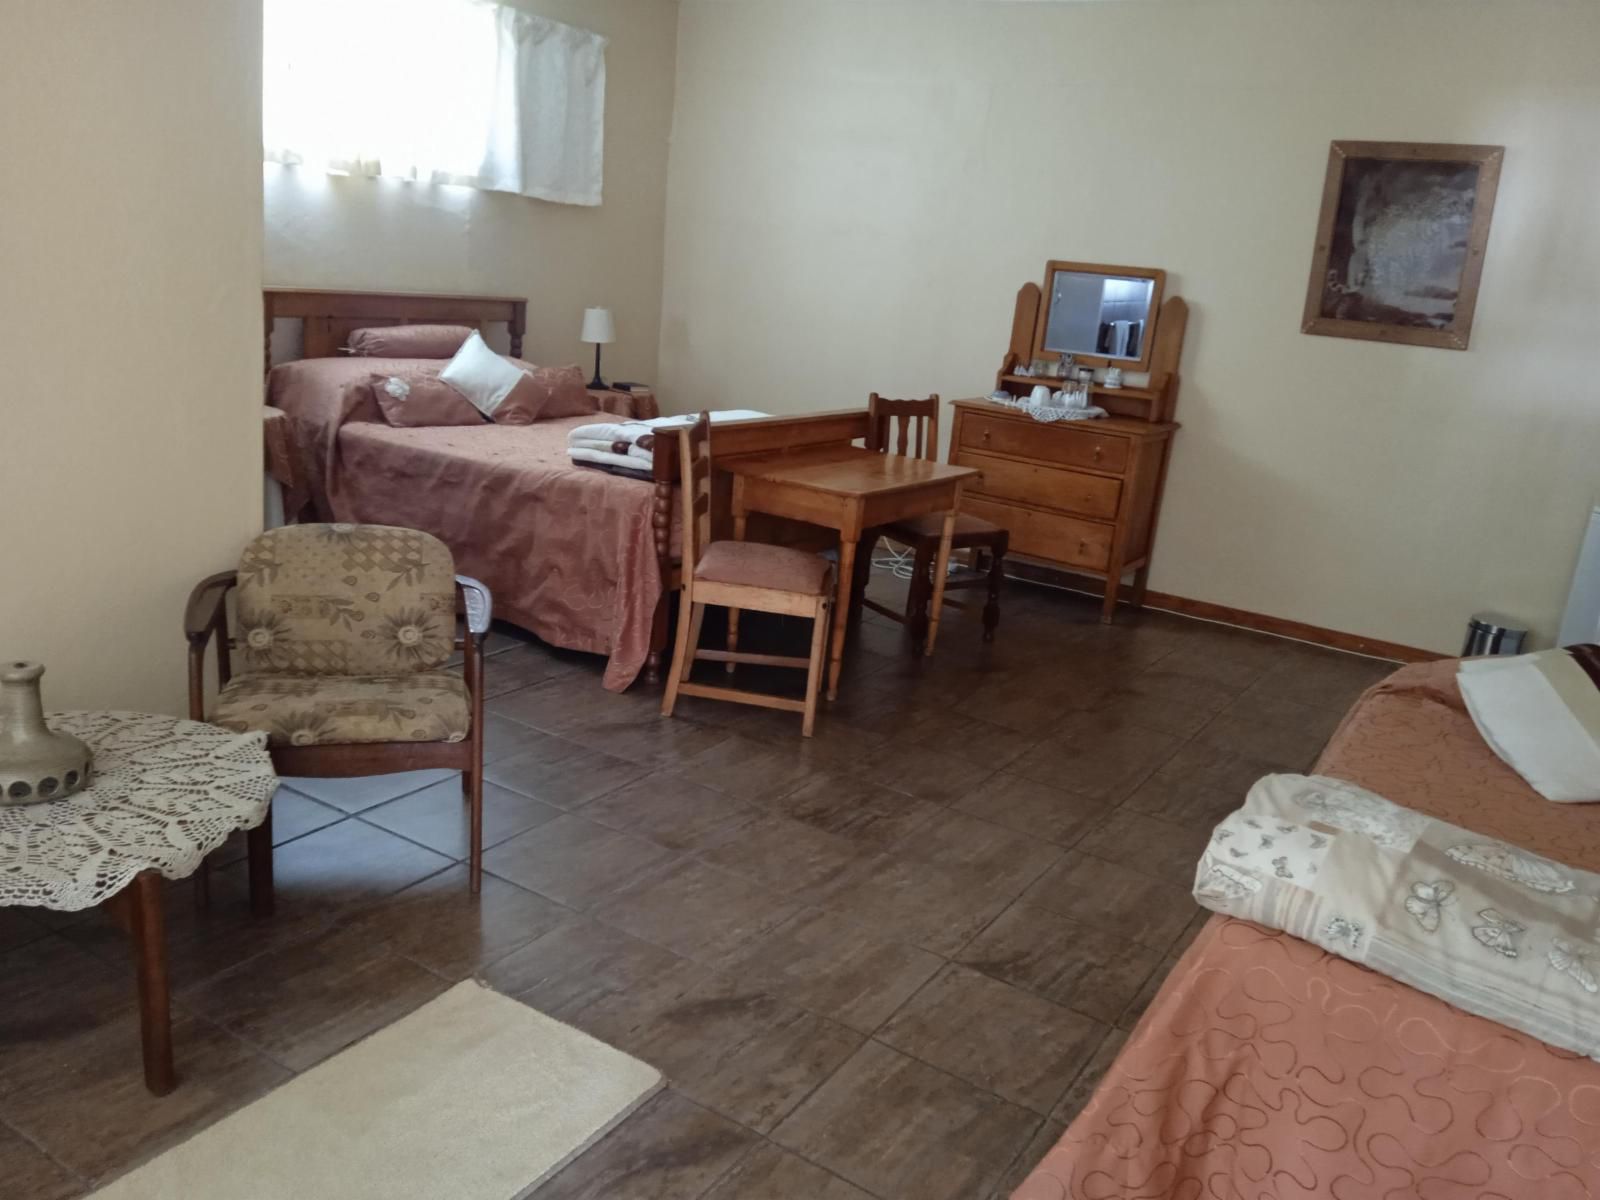 Golden Elephant Guest House Heilbron Free State South Africa 